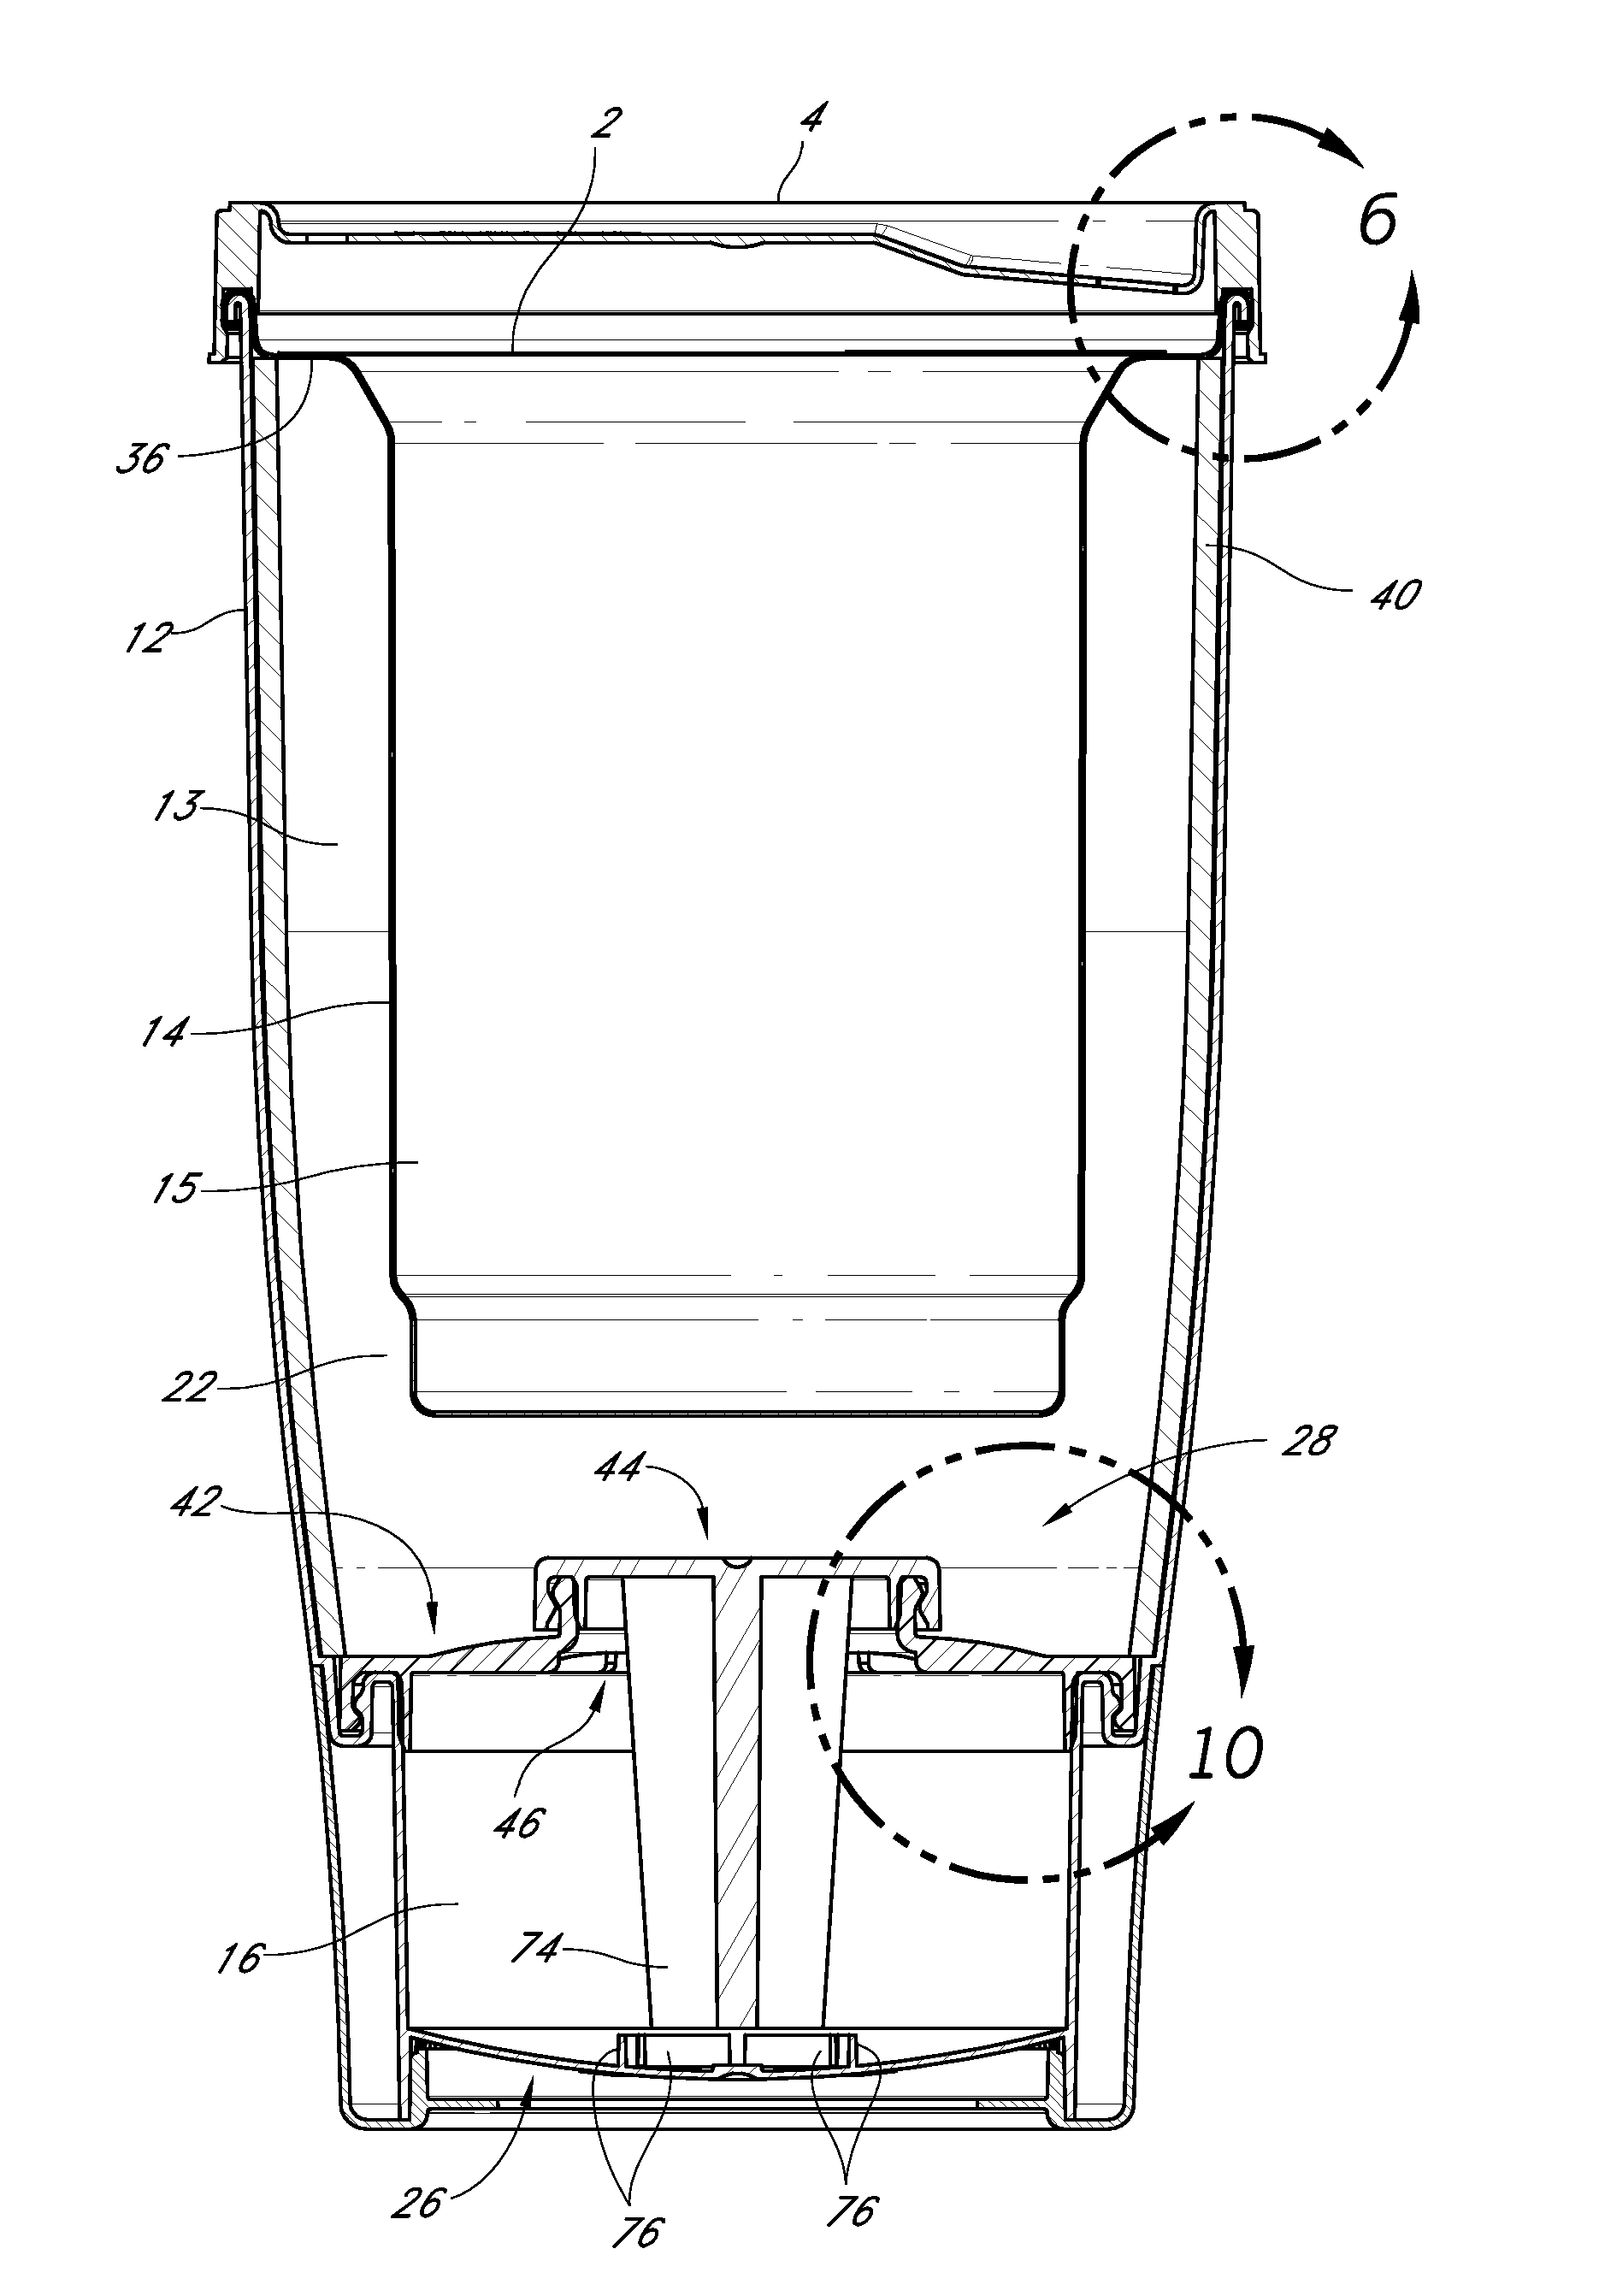 Self-heating systems and methods for rapidly heating a comestible substance